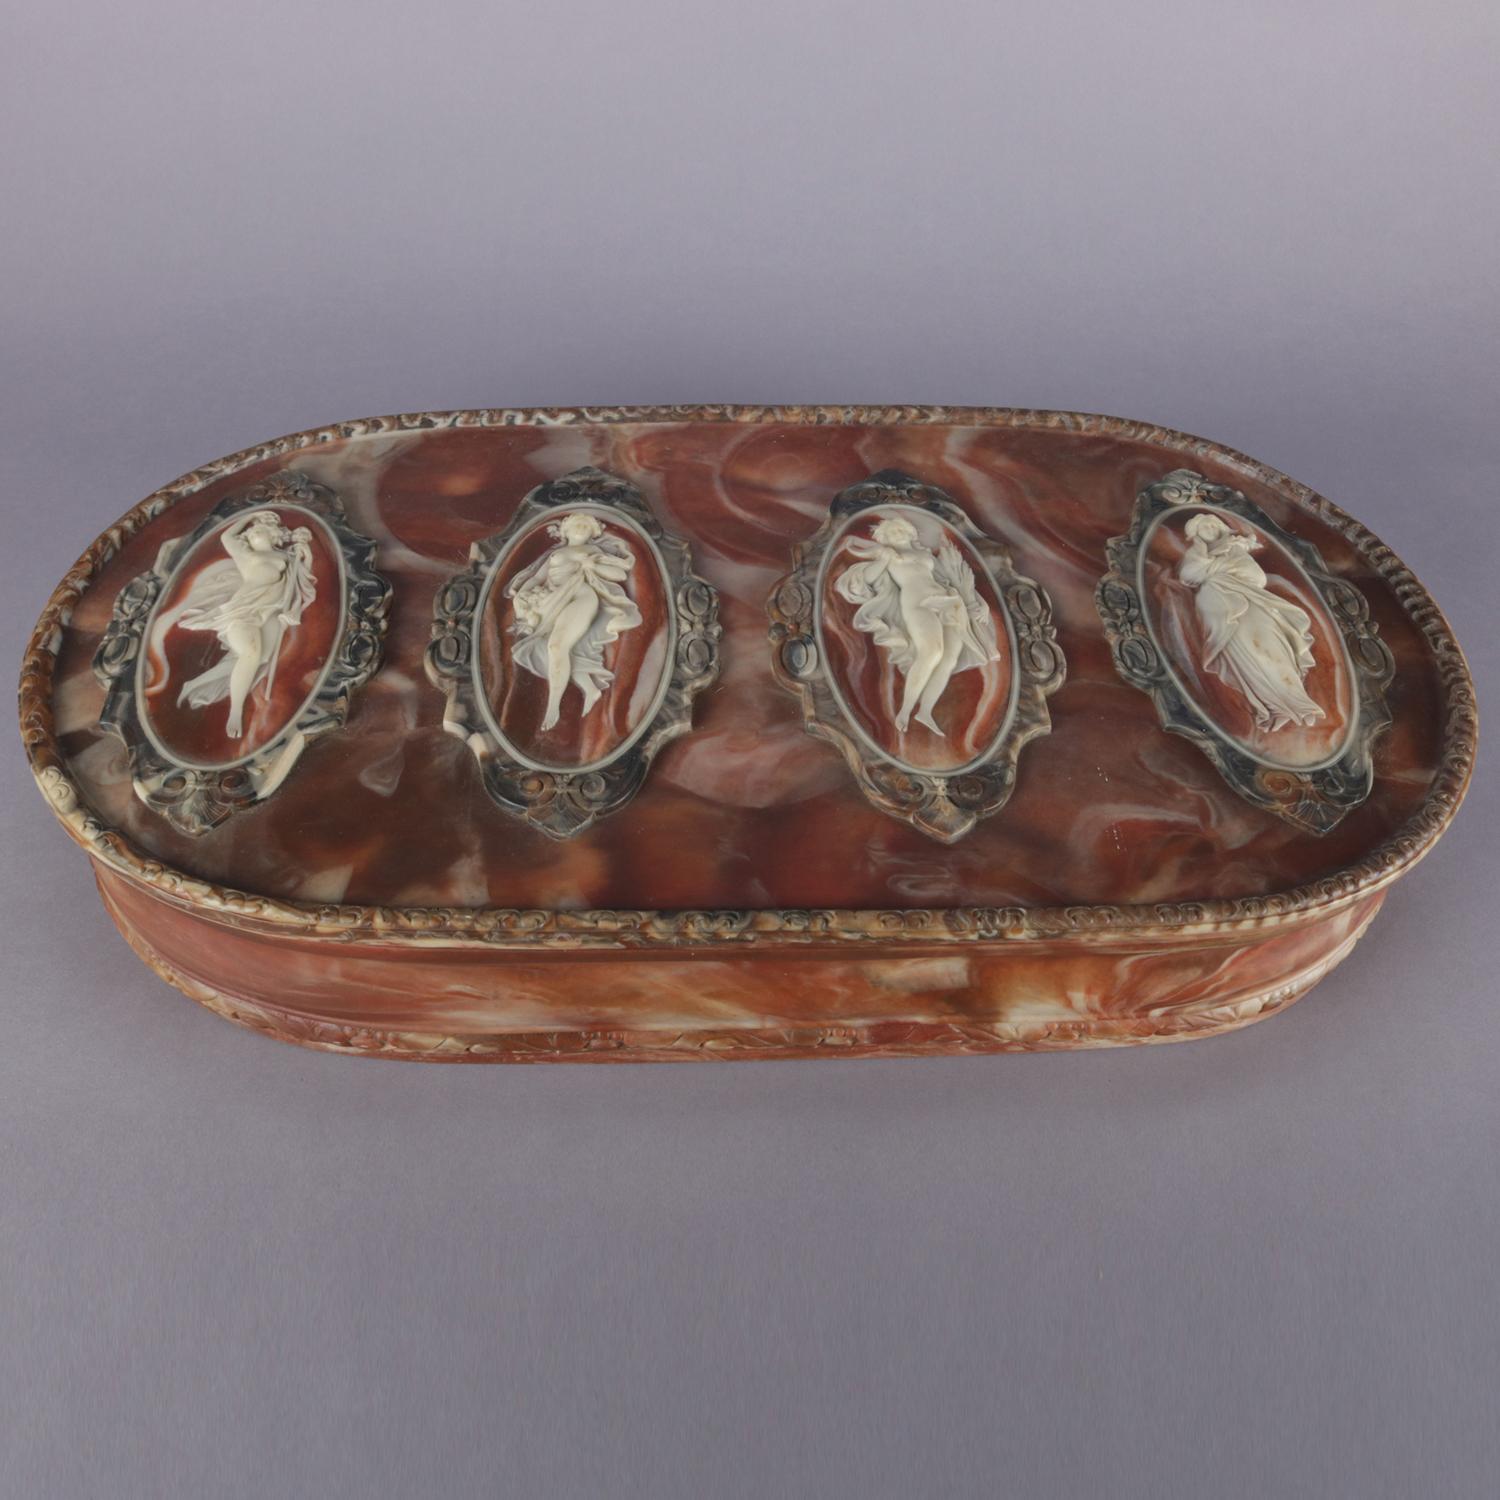 Antique oversized jewelry box features hand-carved incolay stone construction with four reserves with full length portrait cameos of Classical women, interior is lined with velveteen and has two moon form trays jewelry, original 